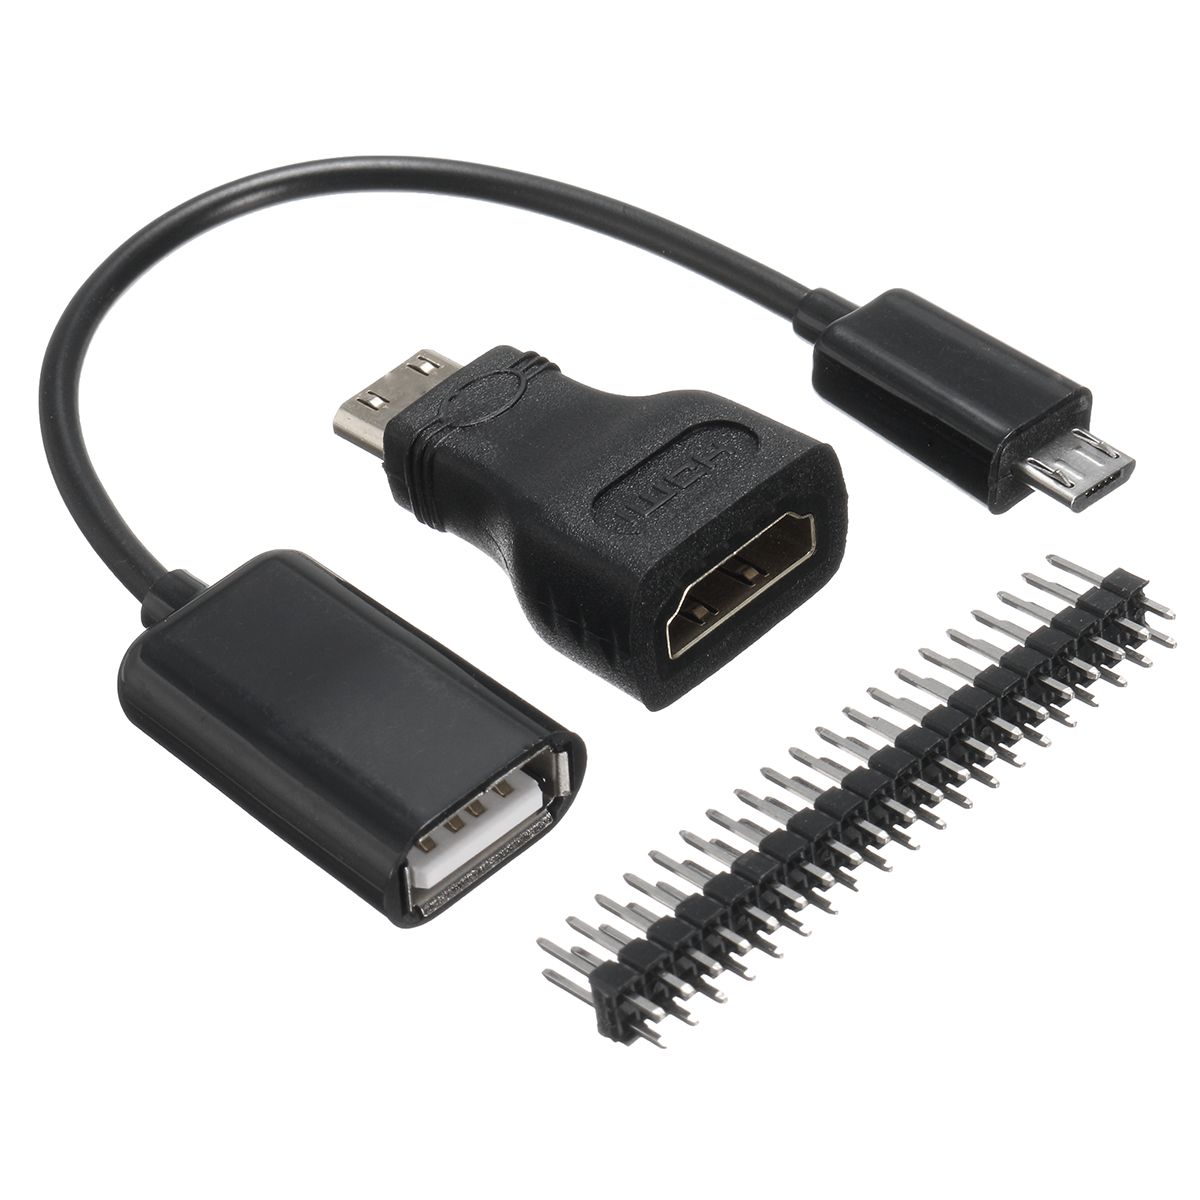 5Sets-3-in-1-Mini-HD-to-HD-AdapterMicro-USB-to-USB-Female-Cable40P-Pin-Kits-For-Raspberry-Pi-Zero-1212975